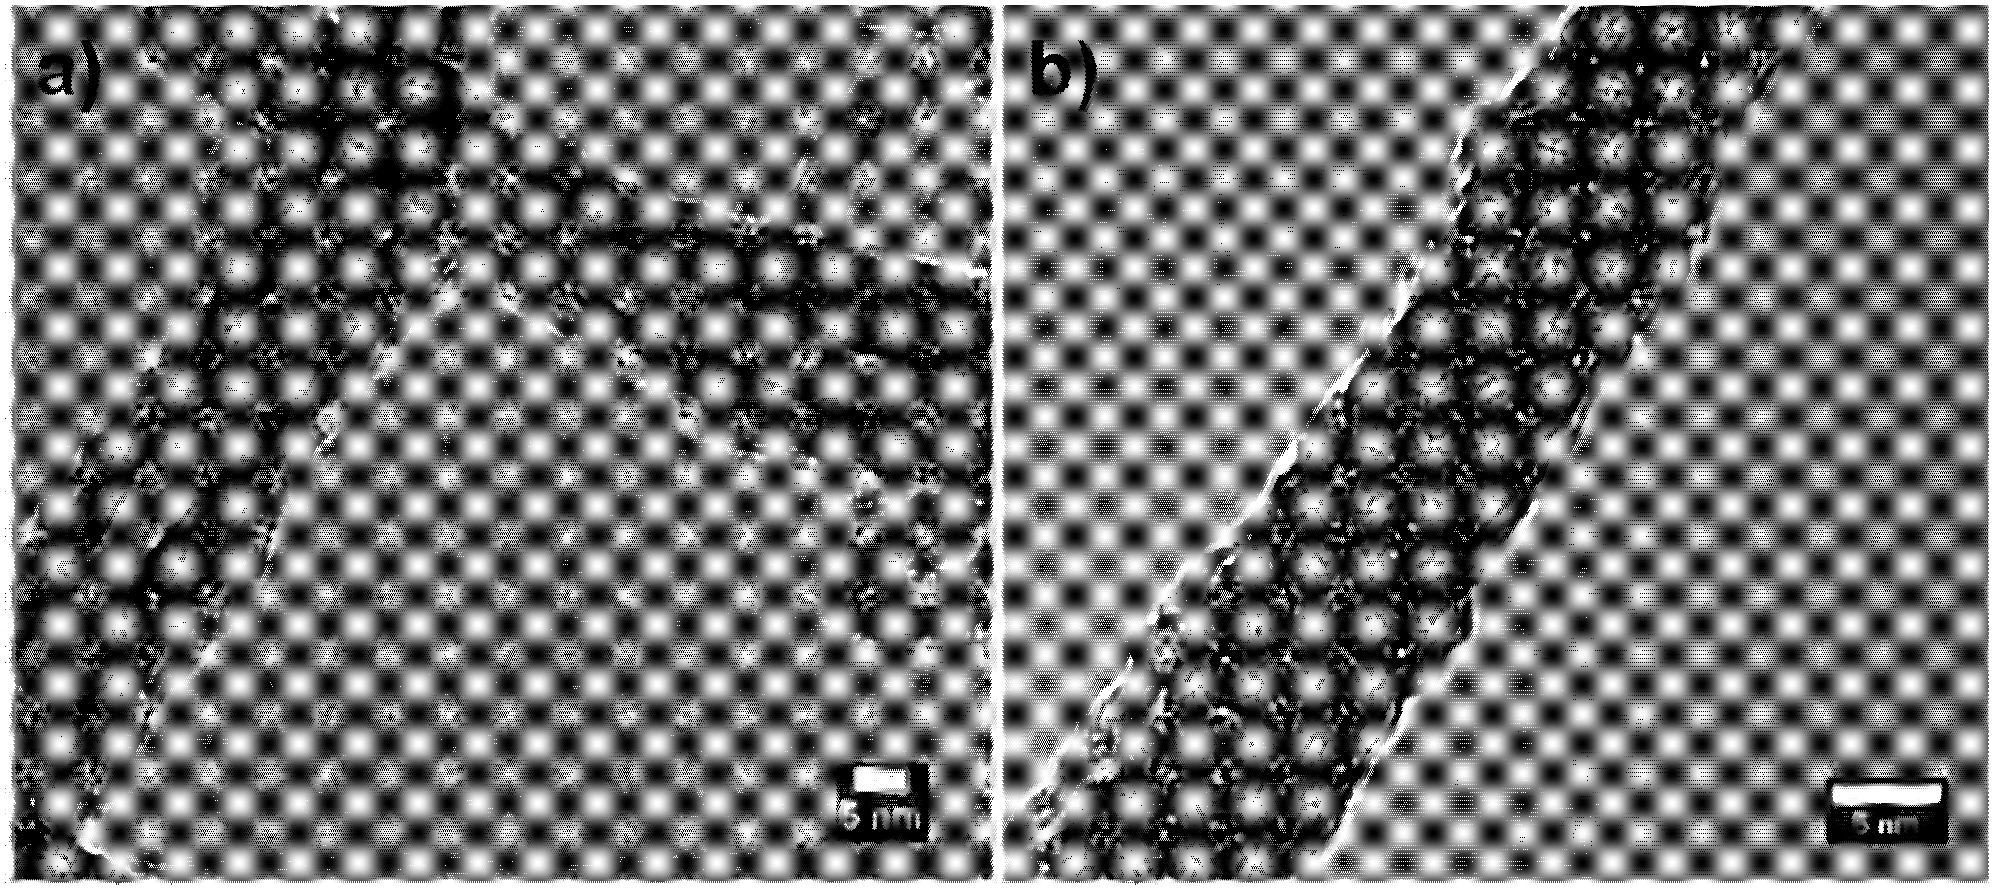 TEM images of P1-templated TiO2 nanotubes (a) and P2-templated TiO2 nanowires (b) obtained after calcination, adapted from [95], with permission of the Royal Society of Chemistry.